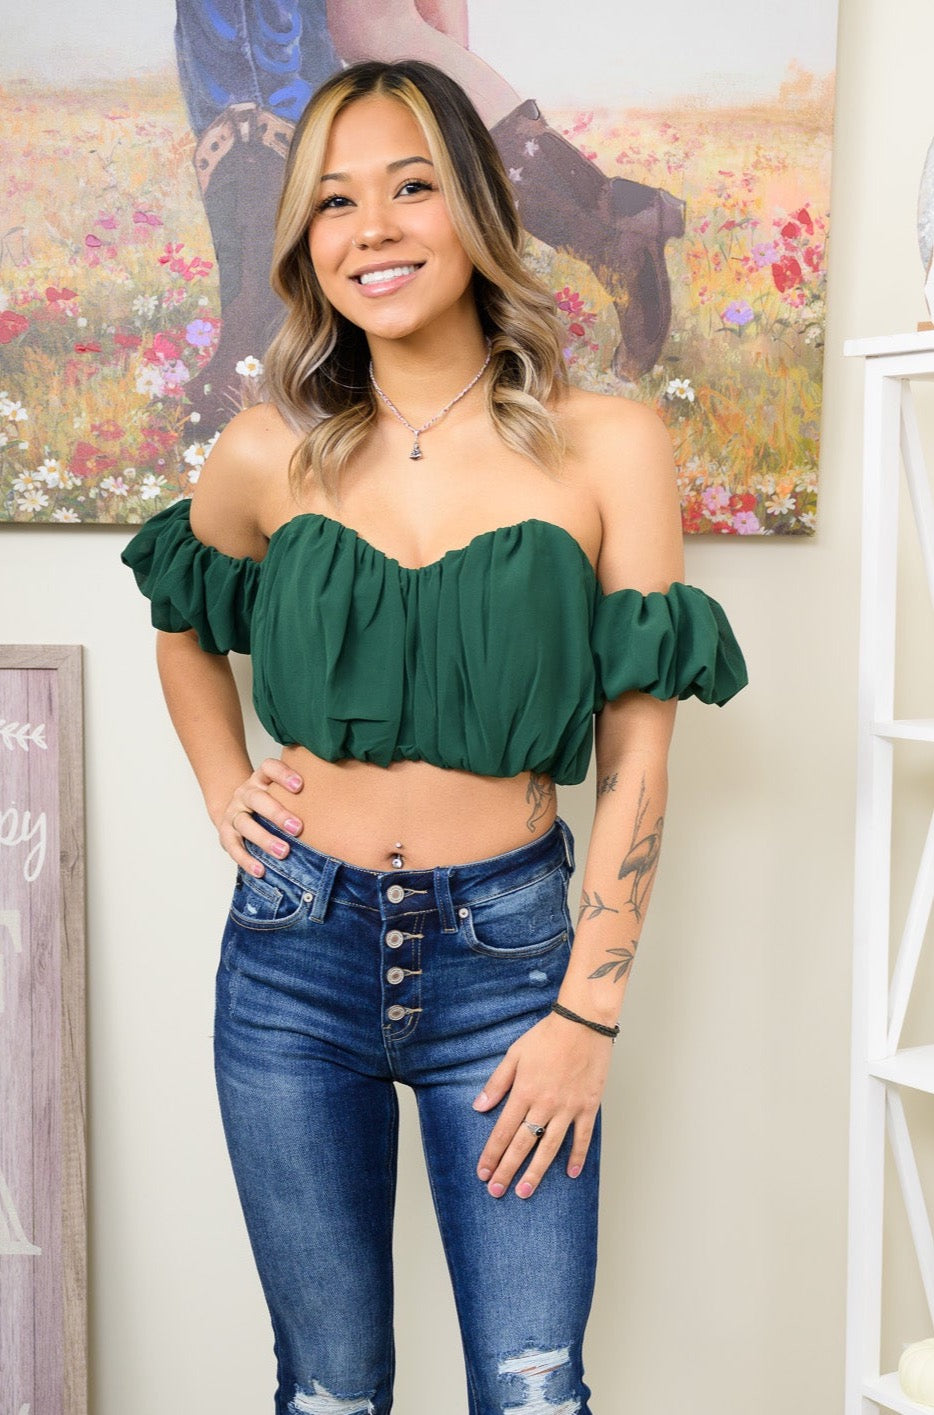 The Perfect Holiday Top is Calling Your Name! Don't Miss Out On Our Drowning Desires Off The Shoulder Chiffon Crop Top! Pair The Staple with Some Black Faux Leather Pants For The Perfect Flirty but Edgy Look!